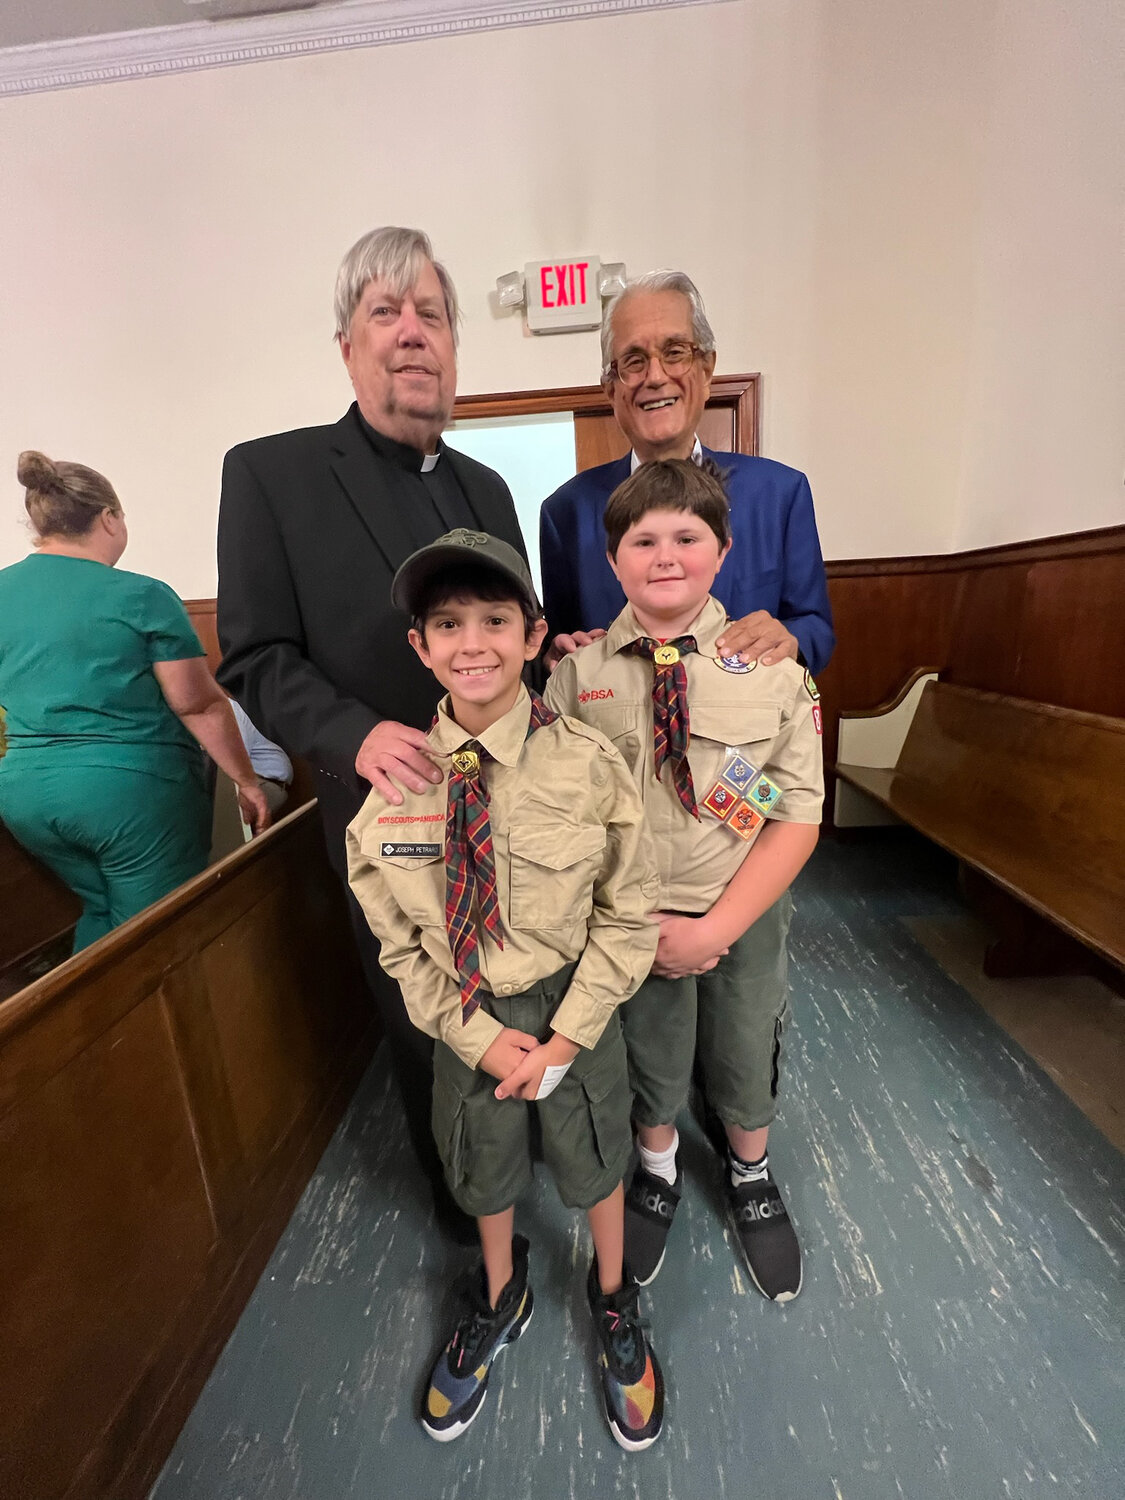 Father Chuck Romano (Left), Former town supervisor and trustee Anthony Santino (Right), Joseph Petraro (age 10, left), PJ Gaffney (Age 9, right)